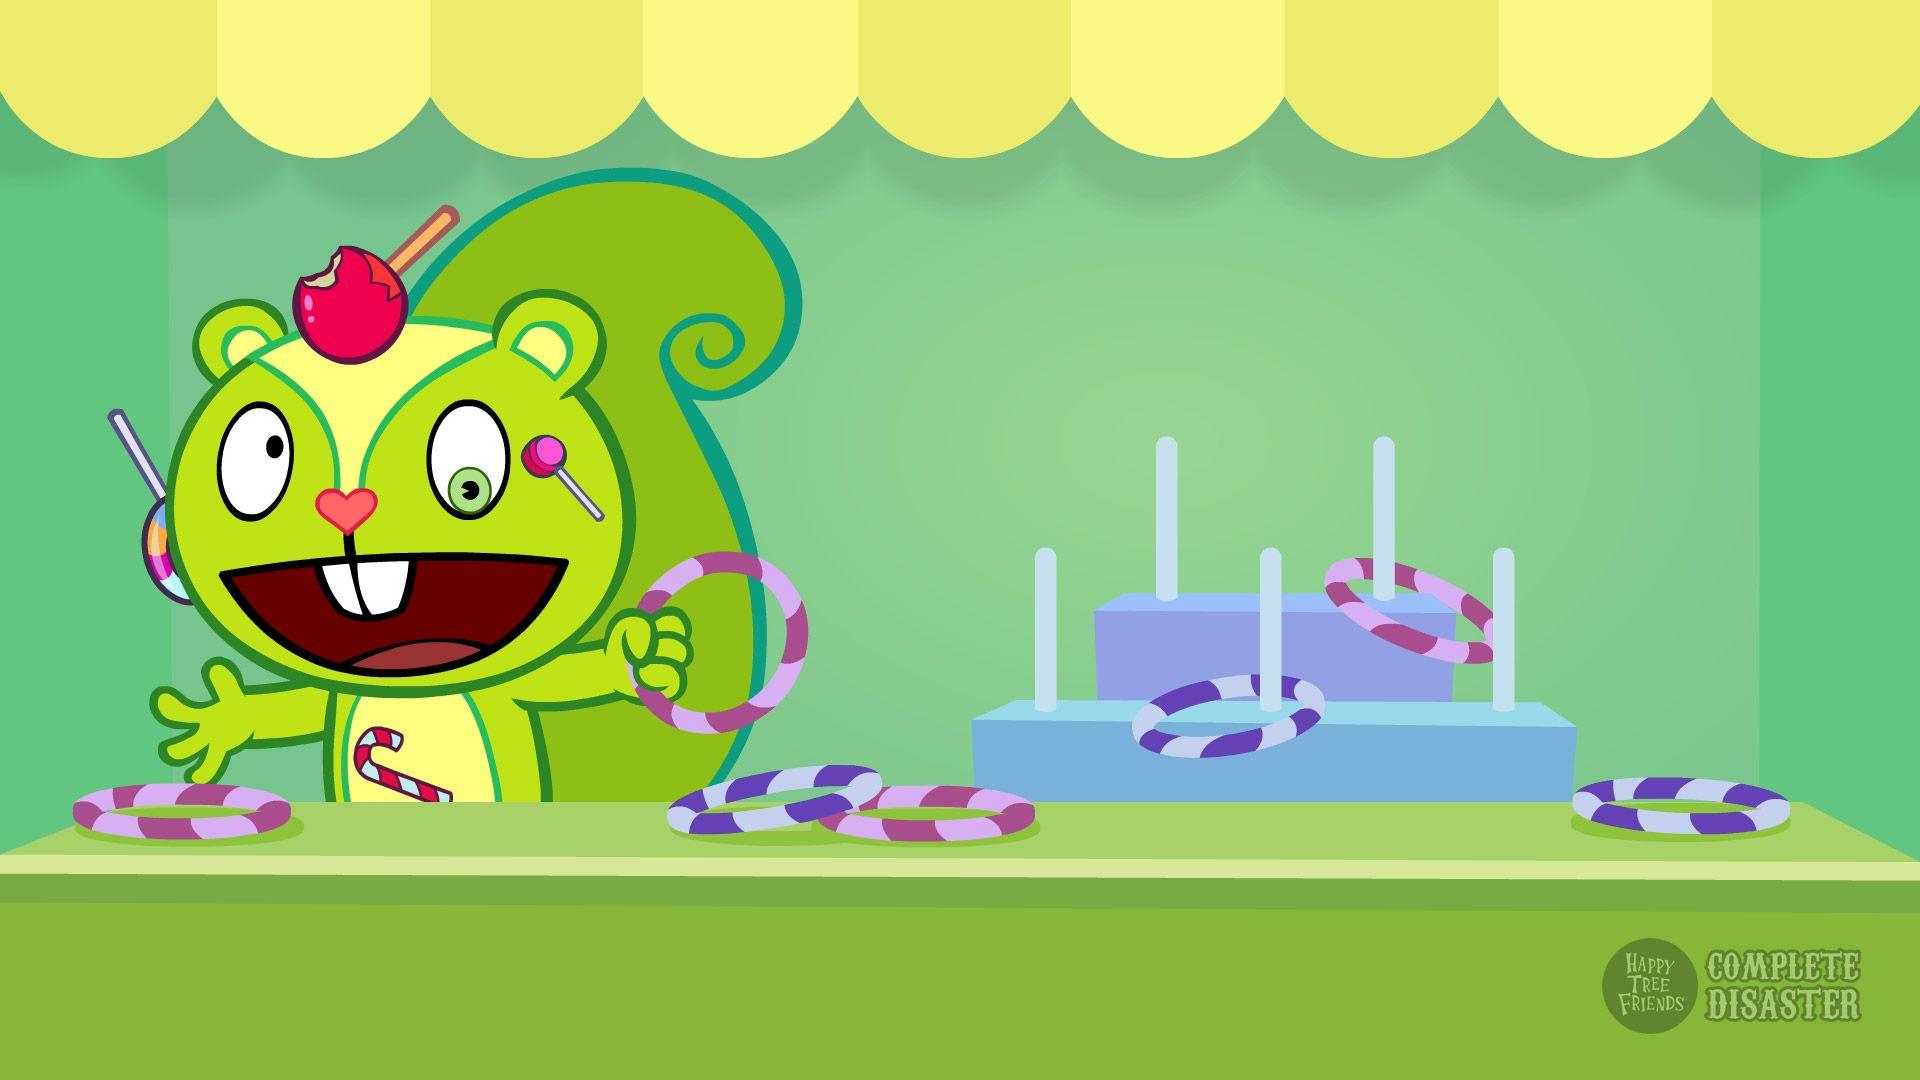 Happy Tree Friends: MORE Complete Disaster Wallpaper Tree Friends